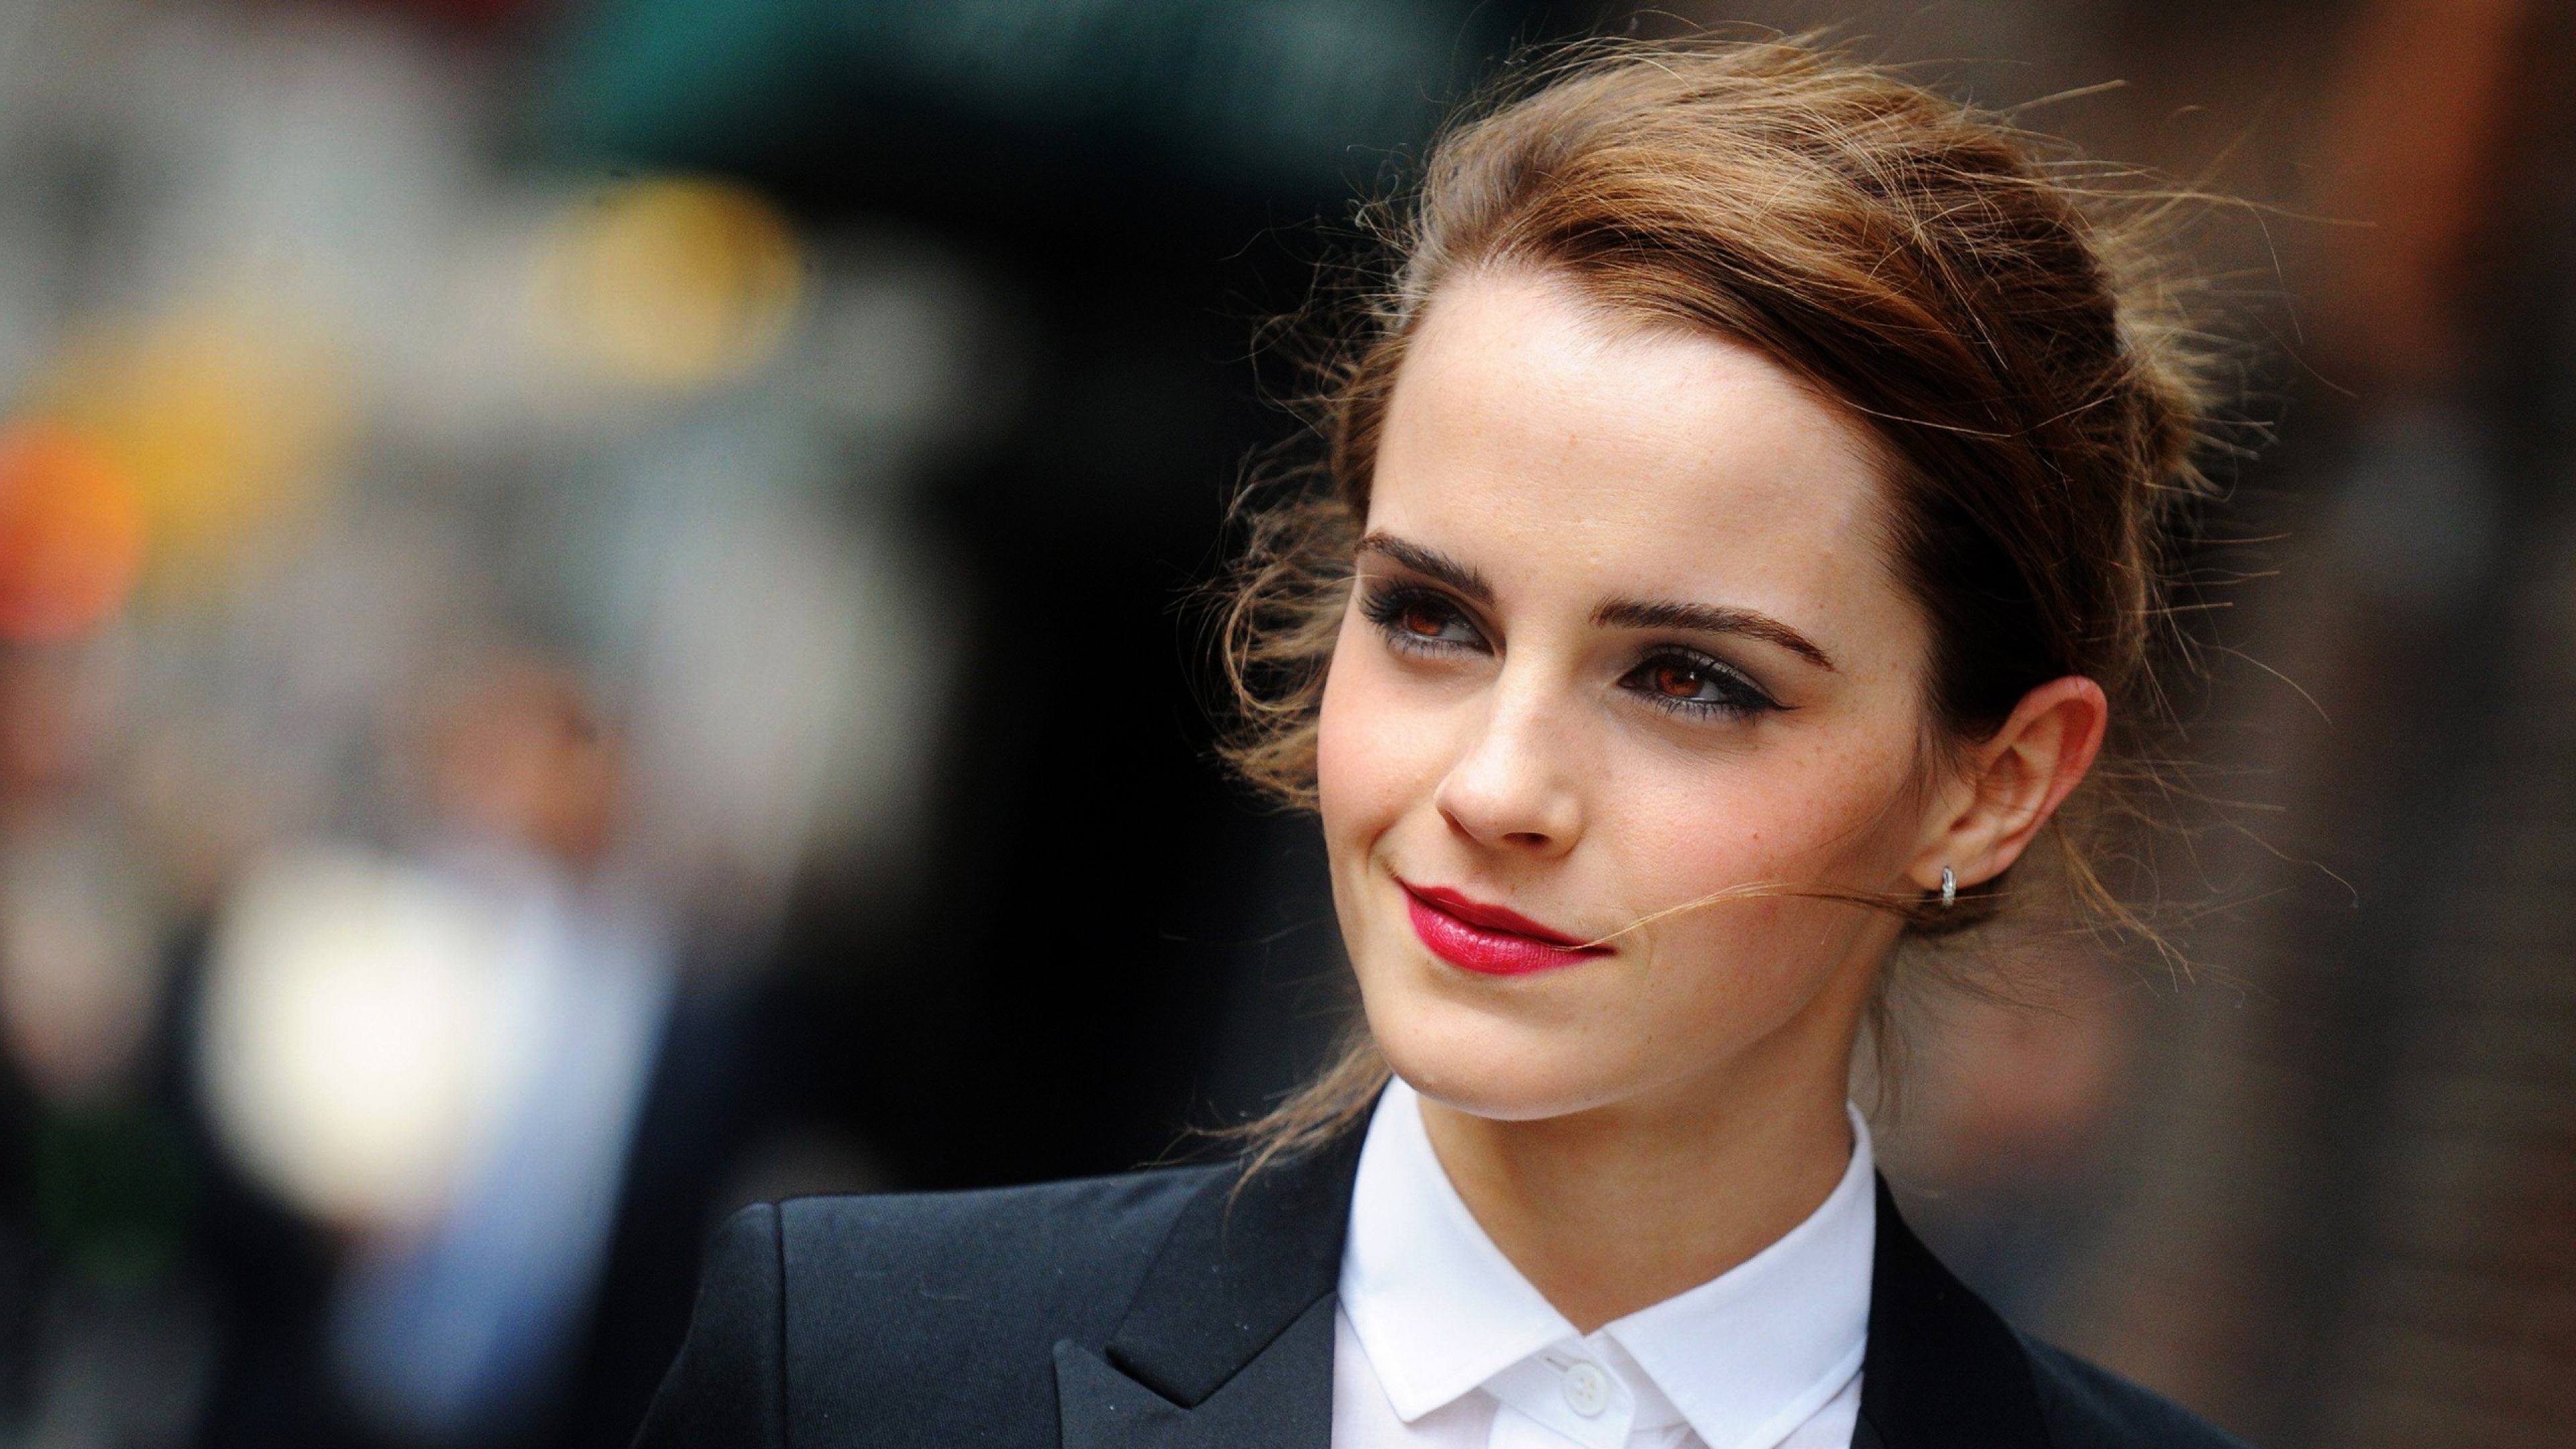 Cute Emma Watson Excellent Beauty Face Look Still Download Free Computer Background Hd Images